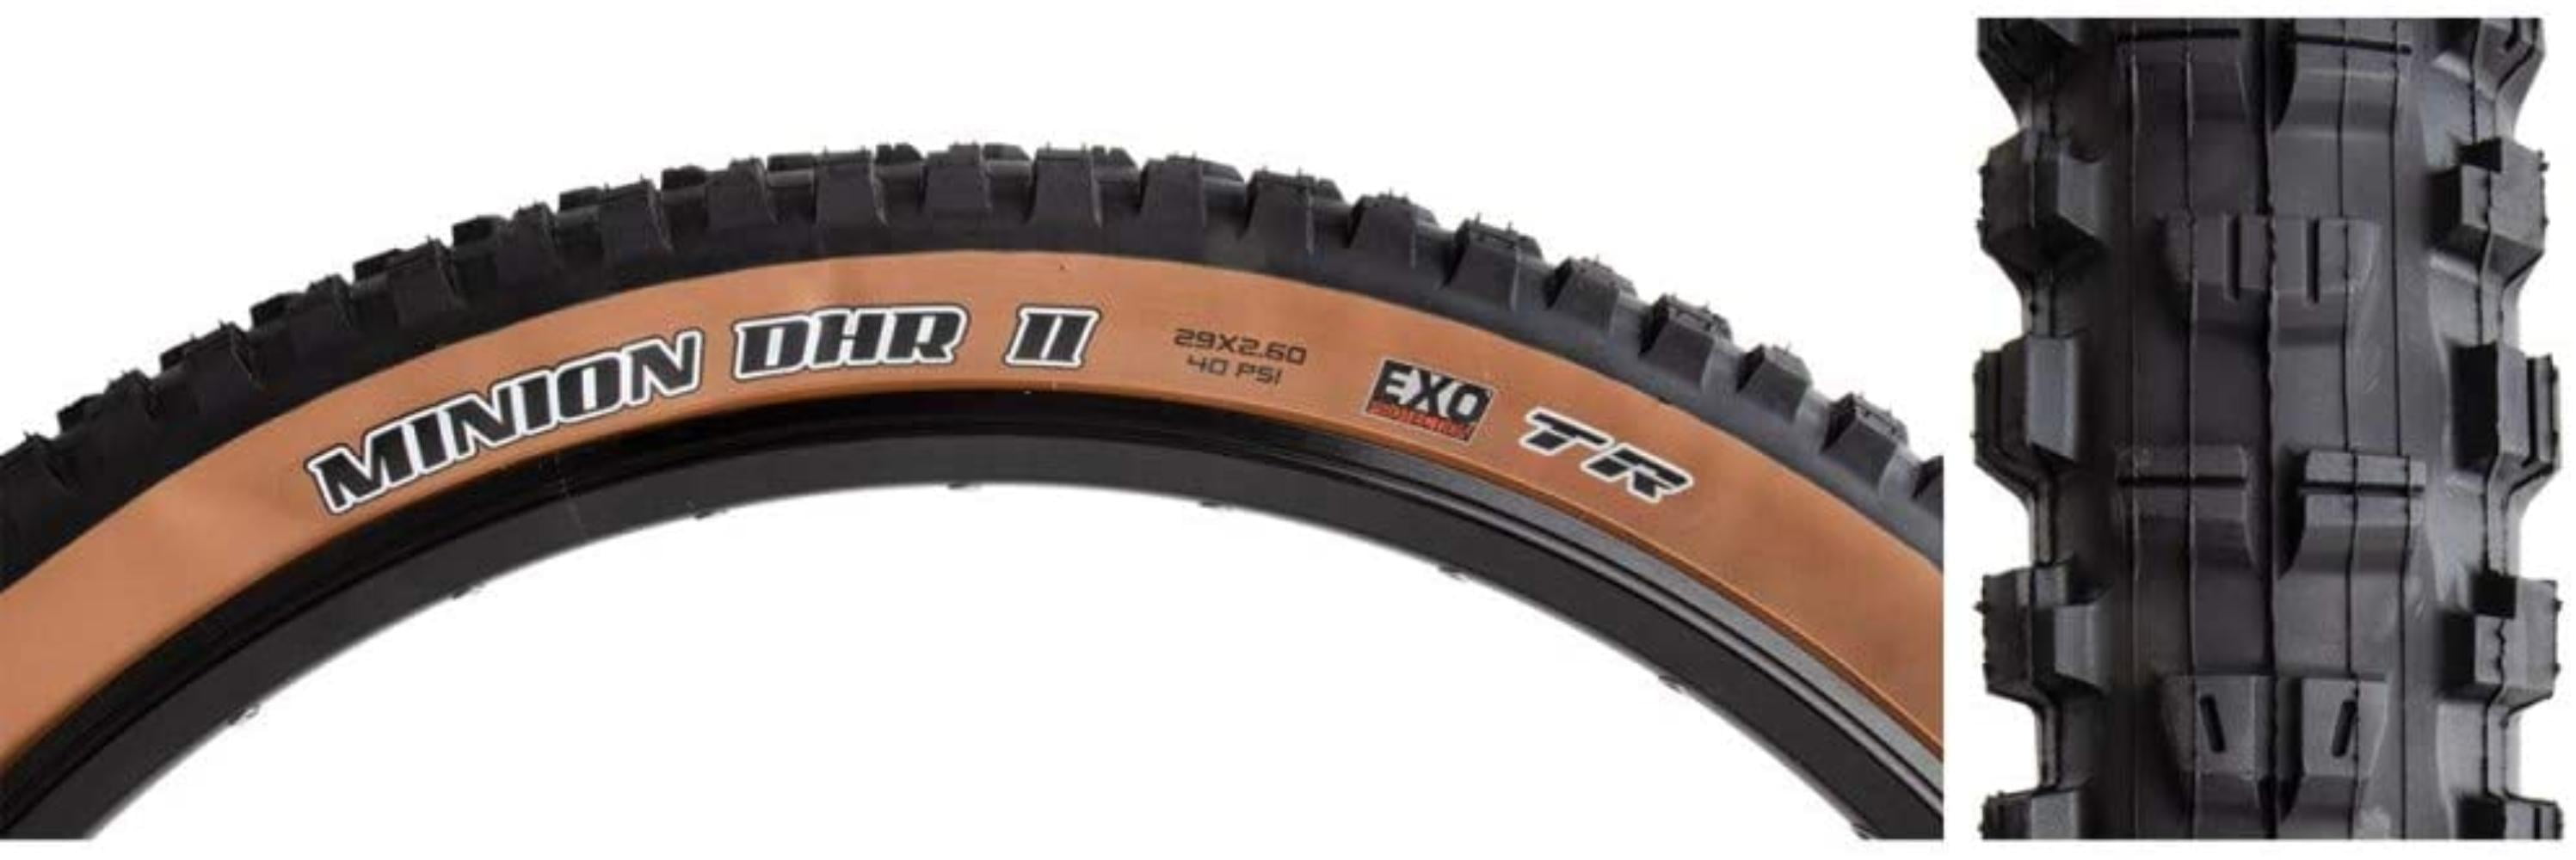 29x2.40 61-622 Black Adults Skinwall Dual EXO Bicycle Tyres Maxxis Unisex  